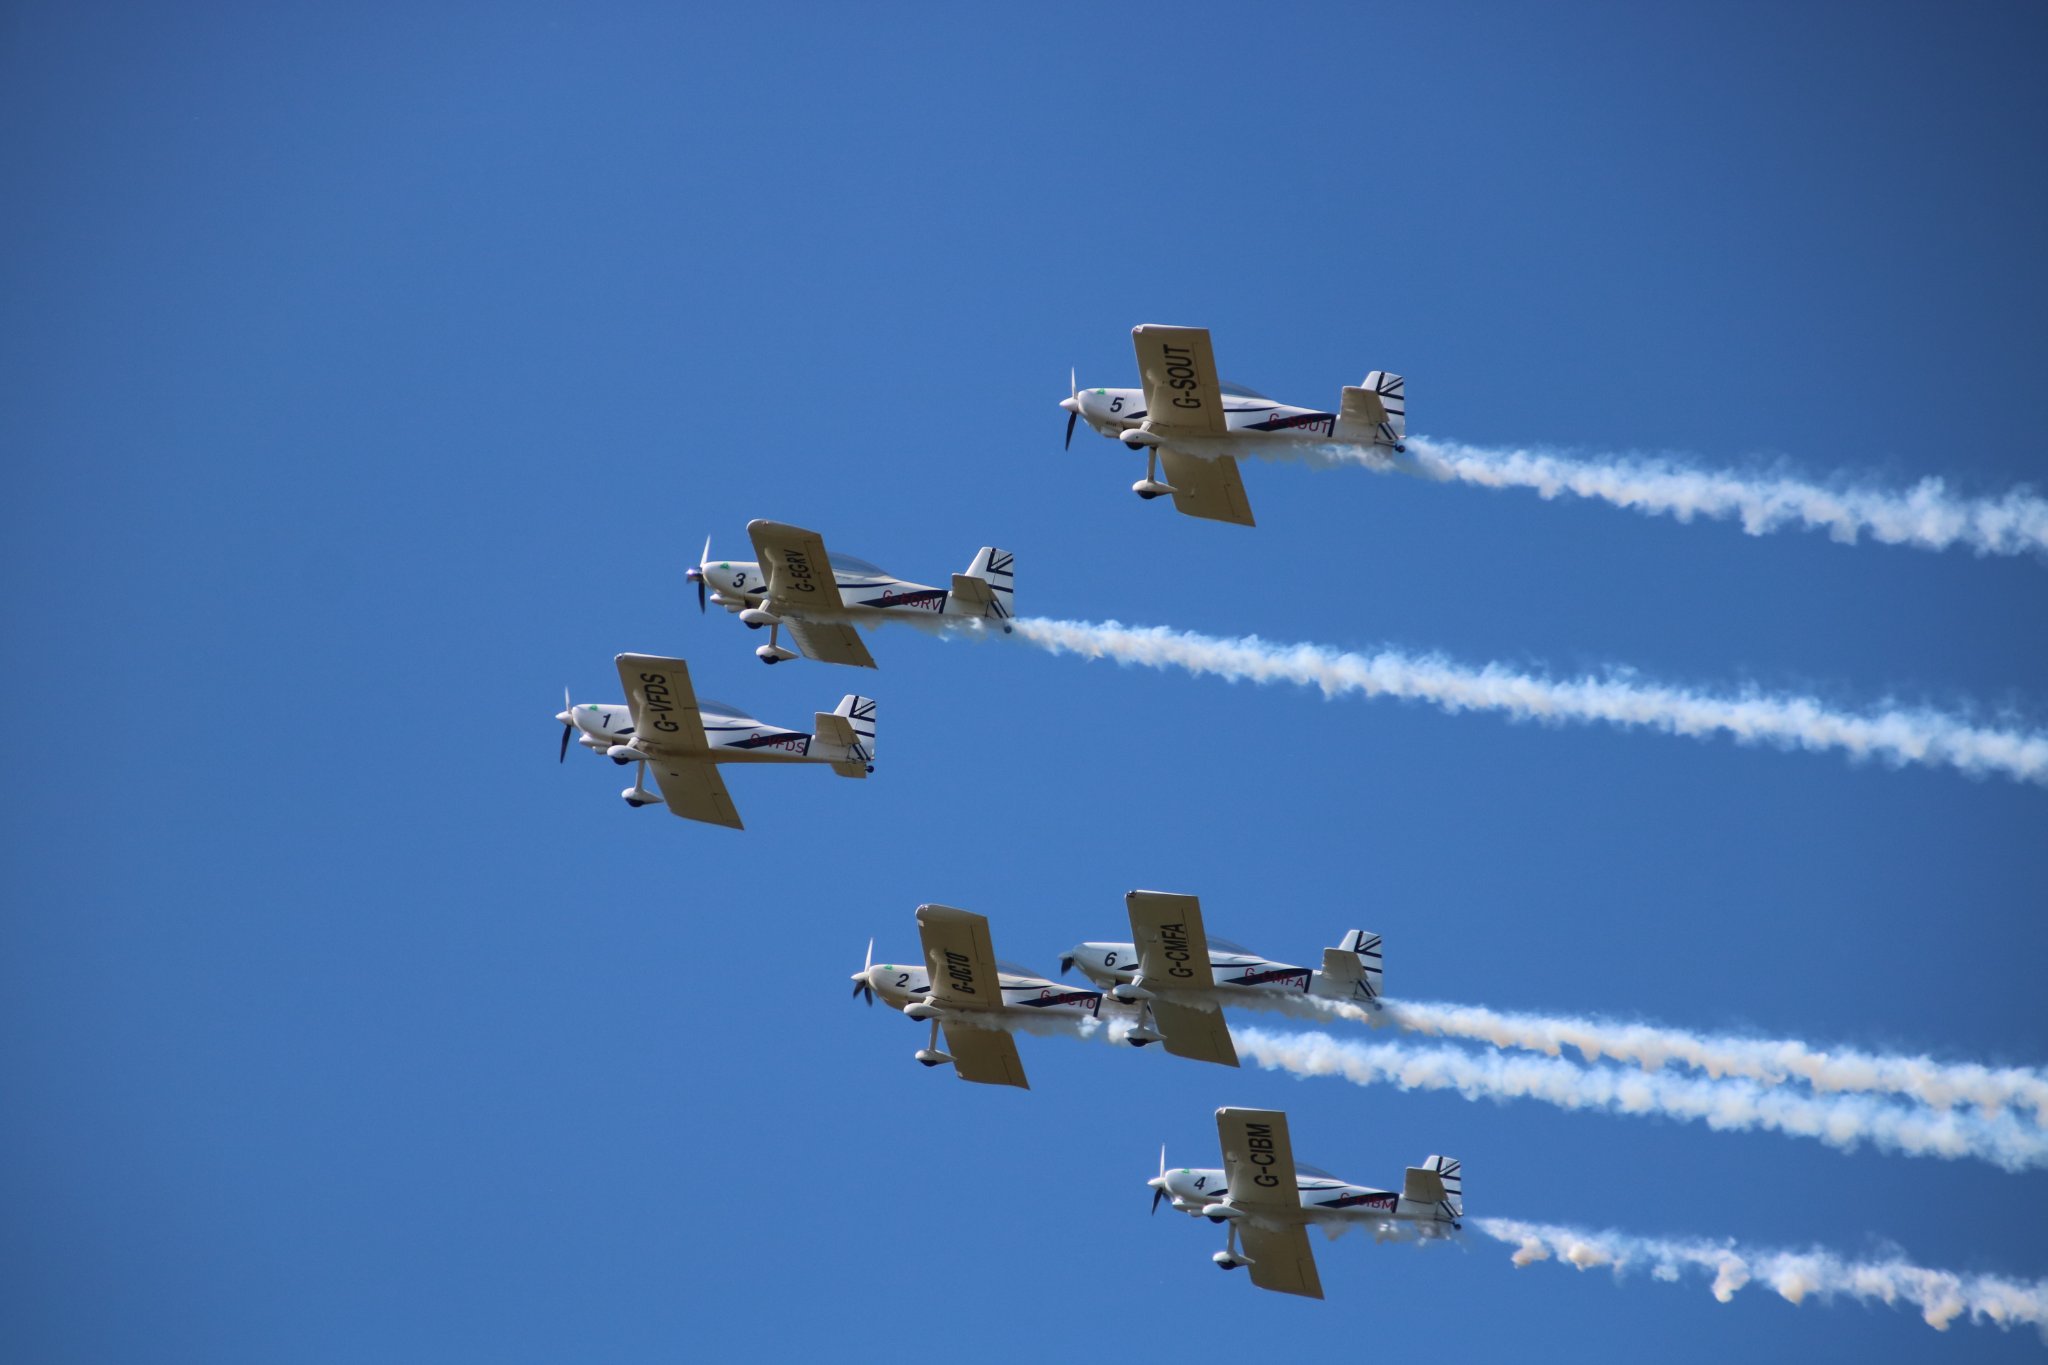 UK team taking part in 'biggest air show on the planet' over Mar Menor lagoon in Spain